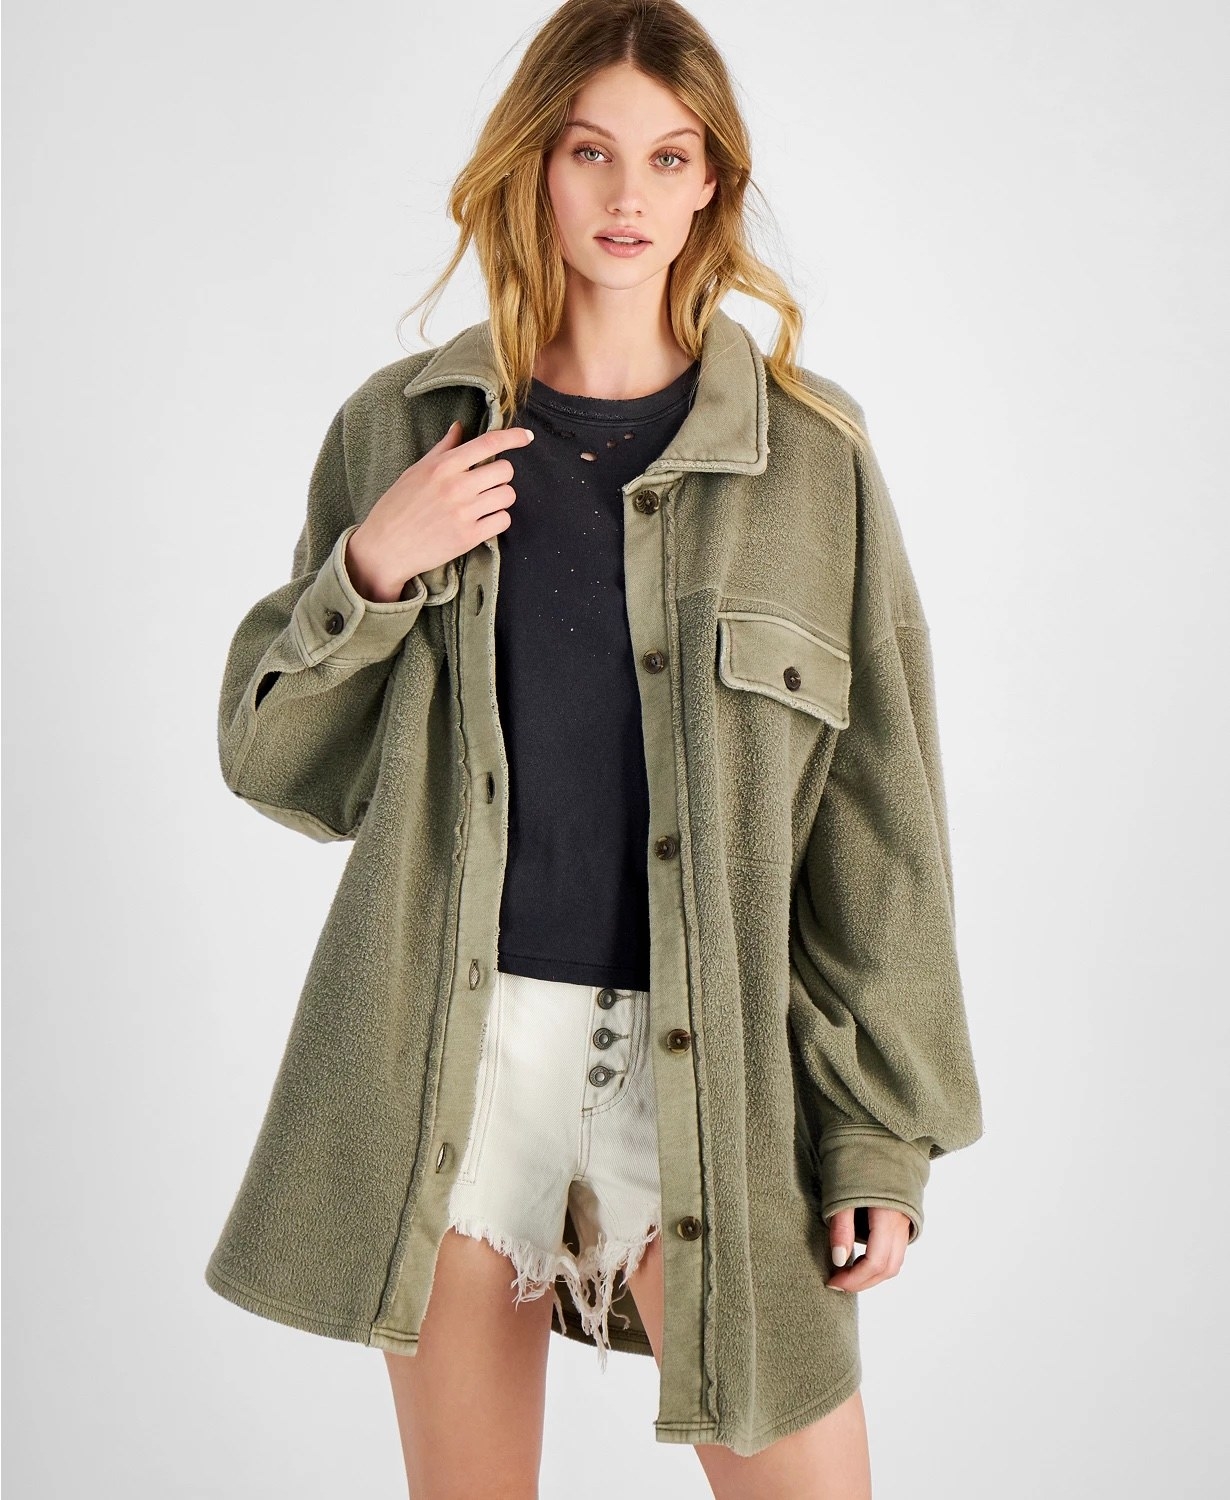 model wearing the olive green jacket